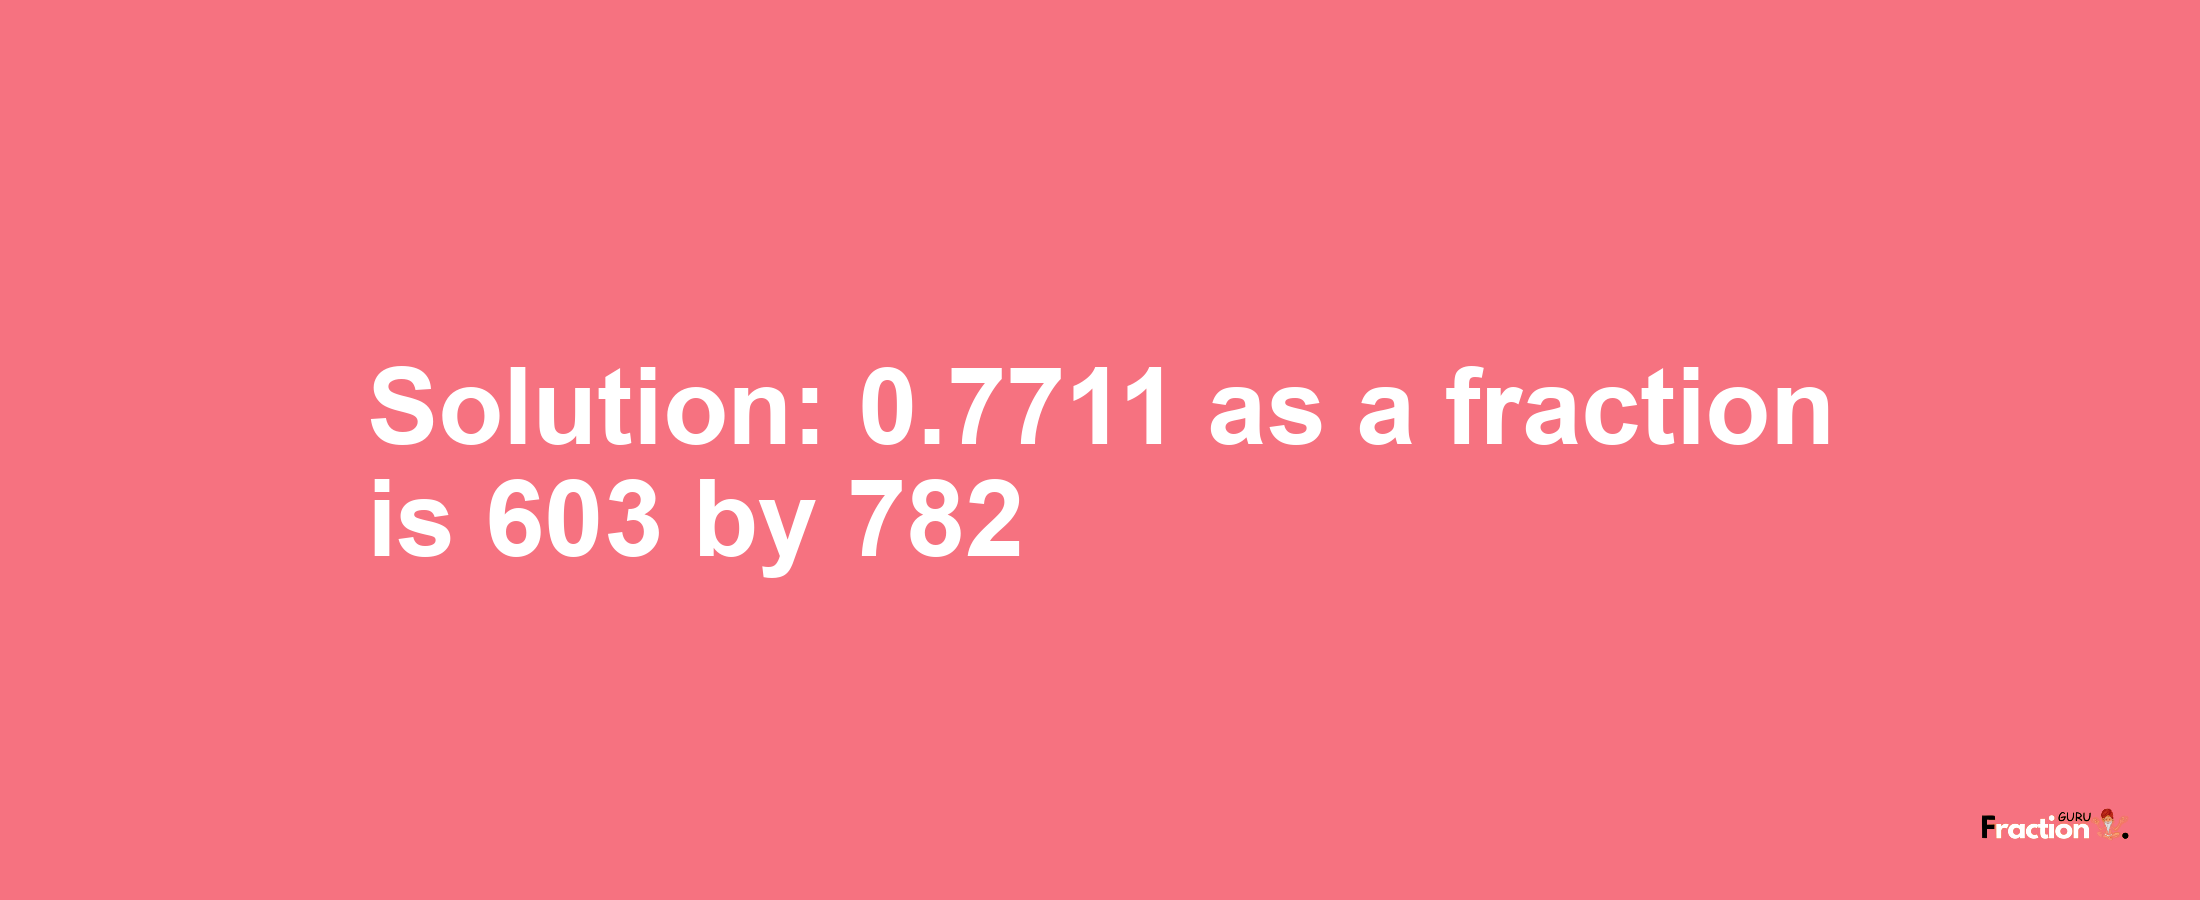 Solution:0.7711 as a fraction is 603/782